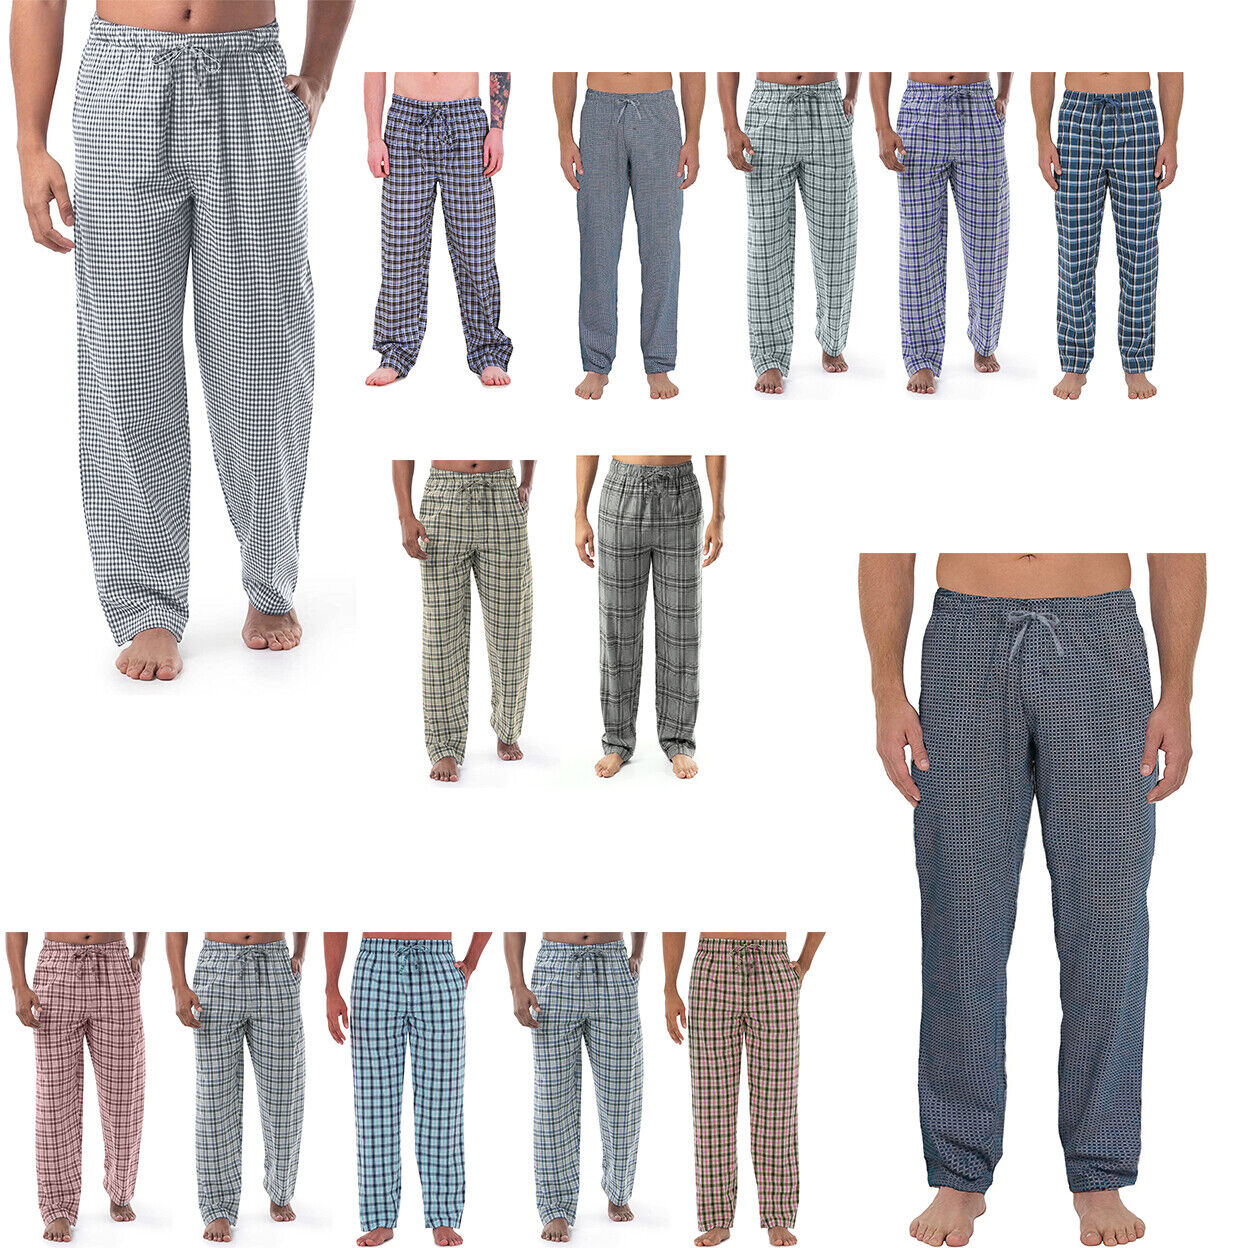 2-Pack: Men's Ultra-Soft Solid & Plaid Cotton Jersey Knit Comfy Sleep Lounge Pajama Pants - Solid & Plaid, X-large